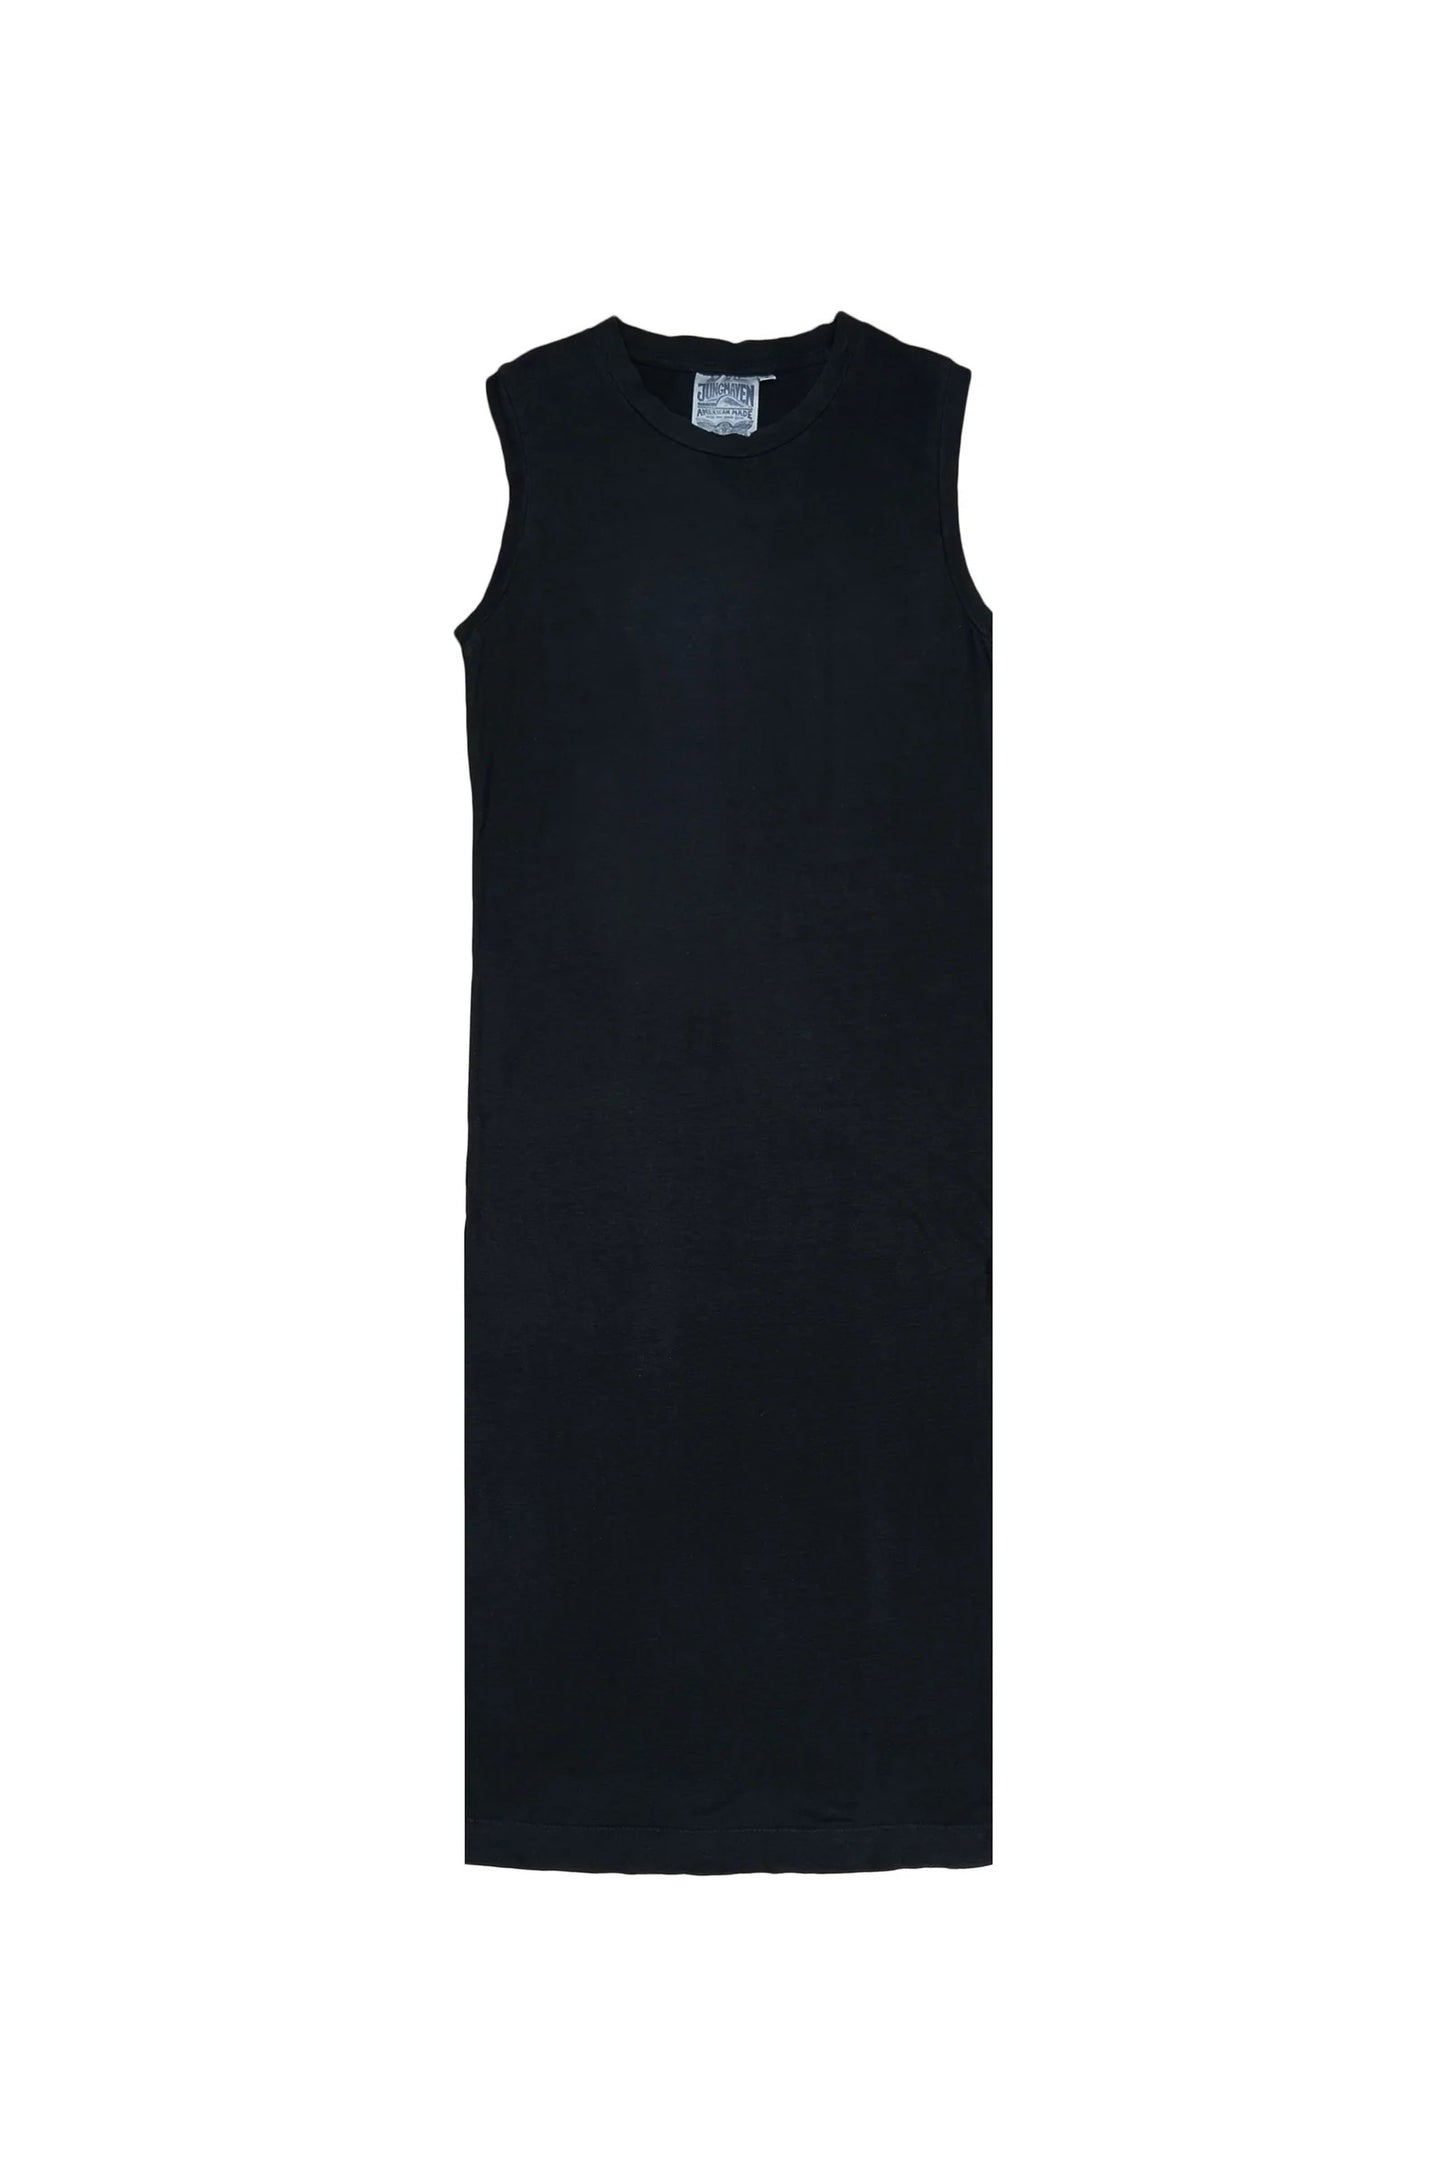 JUNGMAVEN WOMEN'S SUSTAINABLE CLOTHING MADE IN USA - Hermosa Hemp Organic Cotton Tank Dress - Maxi with Side Slits - Vintage Washed Black - Made in California